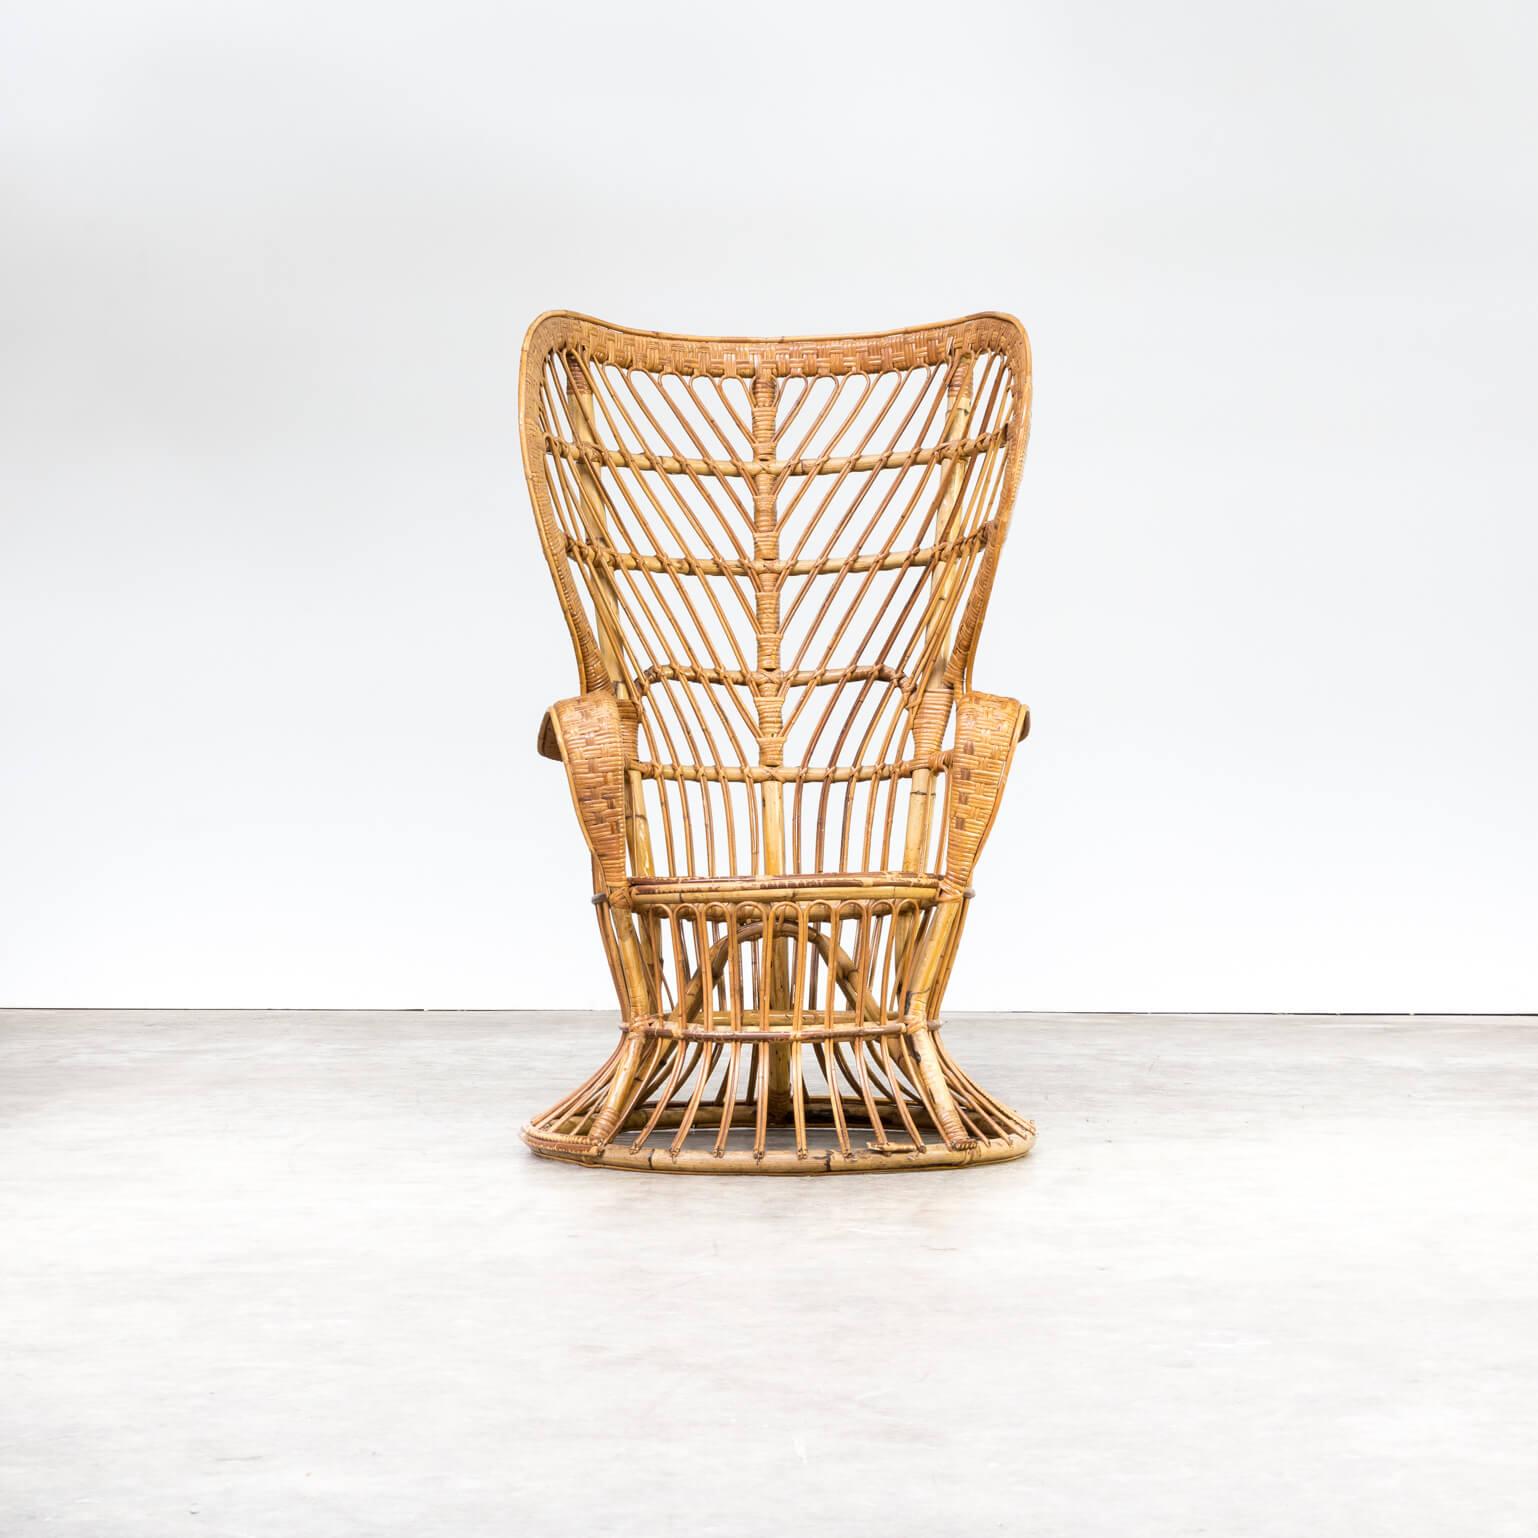 1950s Lio Carminati ‘biancamano’ wicker chair for Pierantonio Bonacina. This Italian handcrafted midcentury rattan high back armchair was designed by Lio Carminati in the 1950s and manufactured by Pierantonio Bonacina. The item was specifically